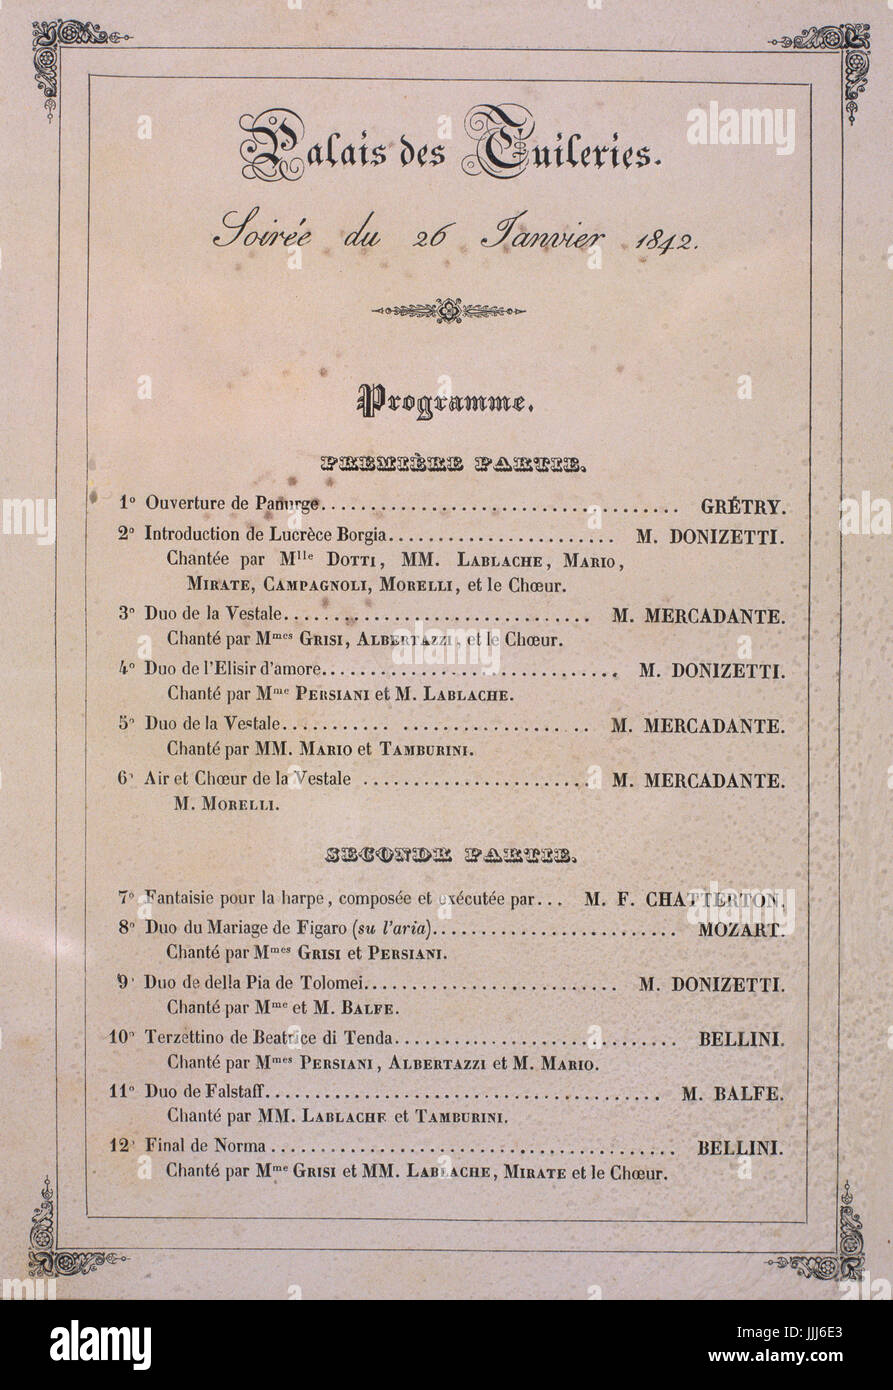 Tuileries Palace (Palais des Tuileries), Paris - silk programme from 1842 concert. Performed by Lablache, Grisi, Persiani, Tamburini, Campagnoli, Mirate, Mario. Singing music by Mercadante, Chatterton and others. Stock Photo